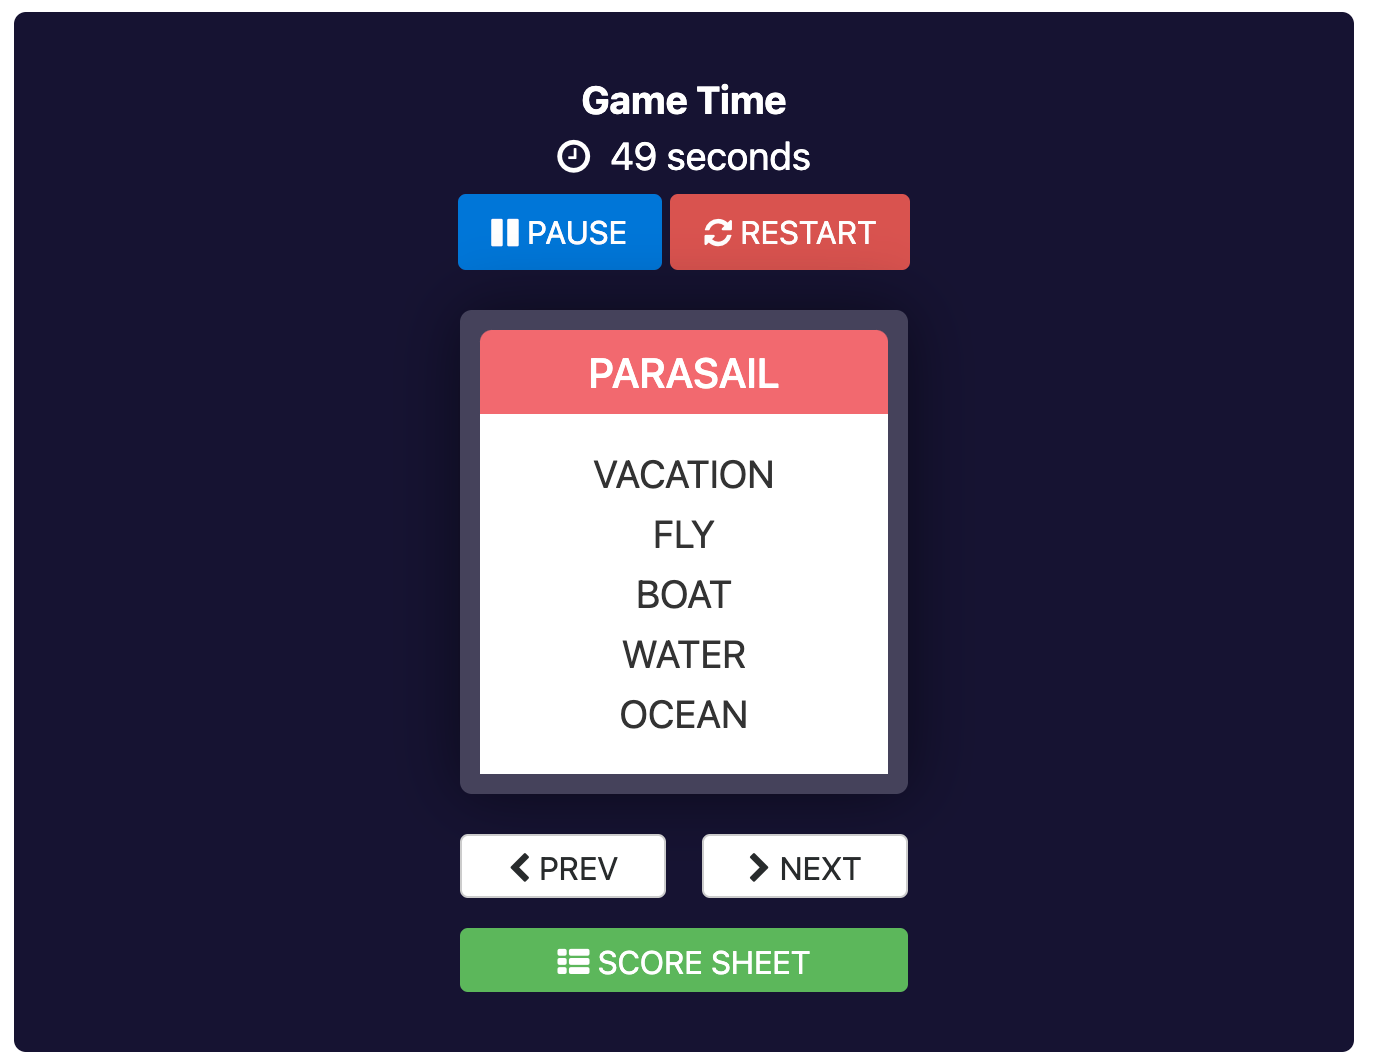 A Taboo Card containing the word 'Parasail' with 48 seconds left on the clock for the taboo giver